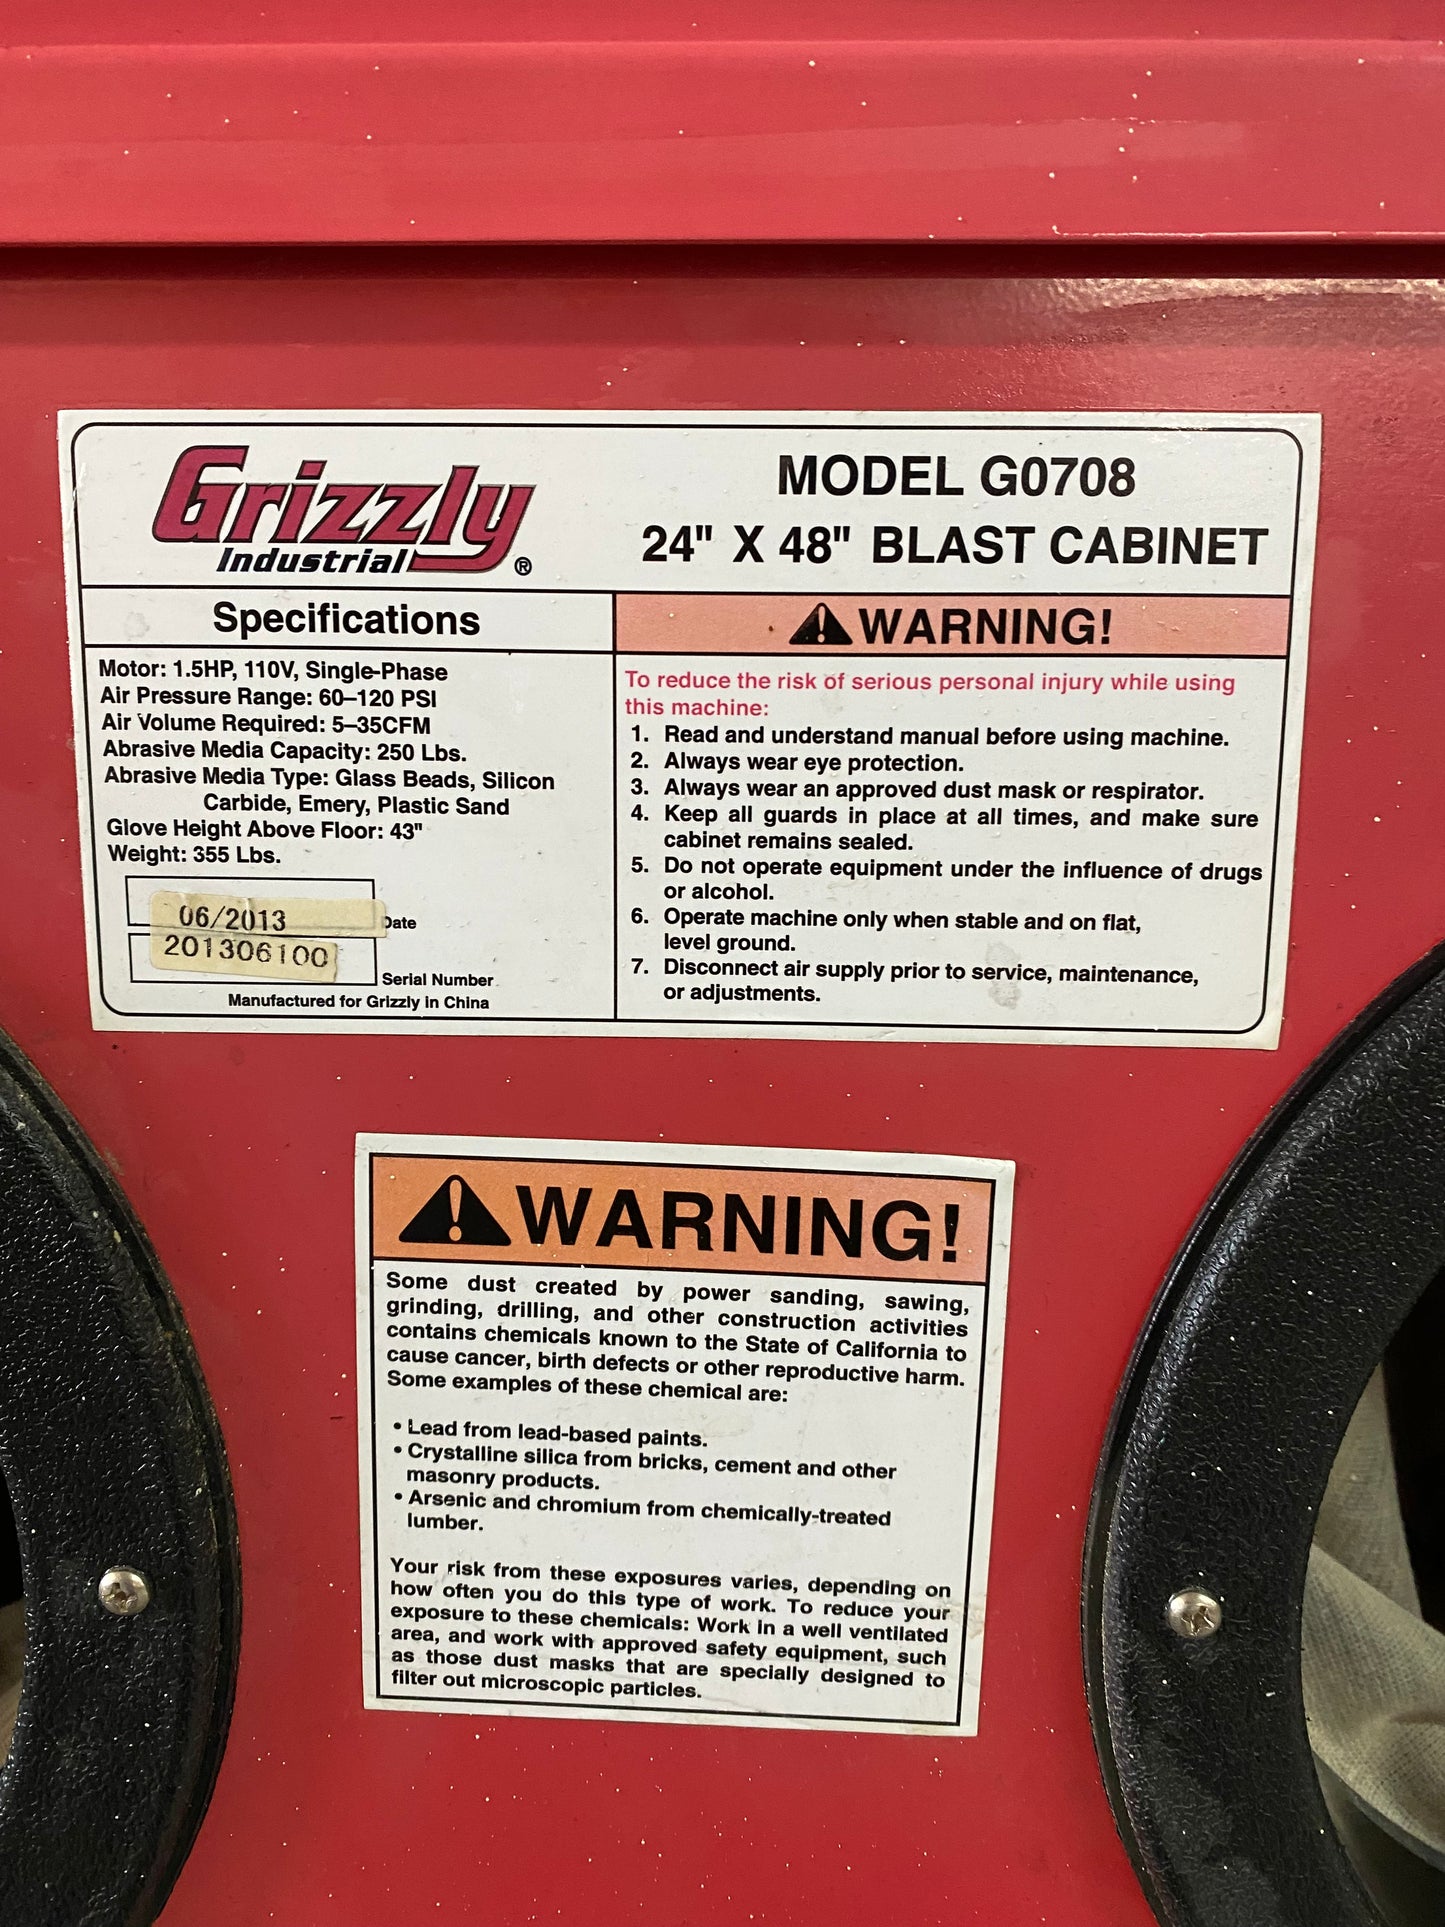 2013 Grizzly Blast Cabinet Model G0708 - Illinois